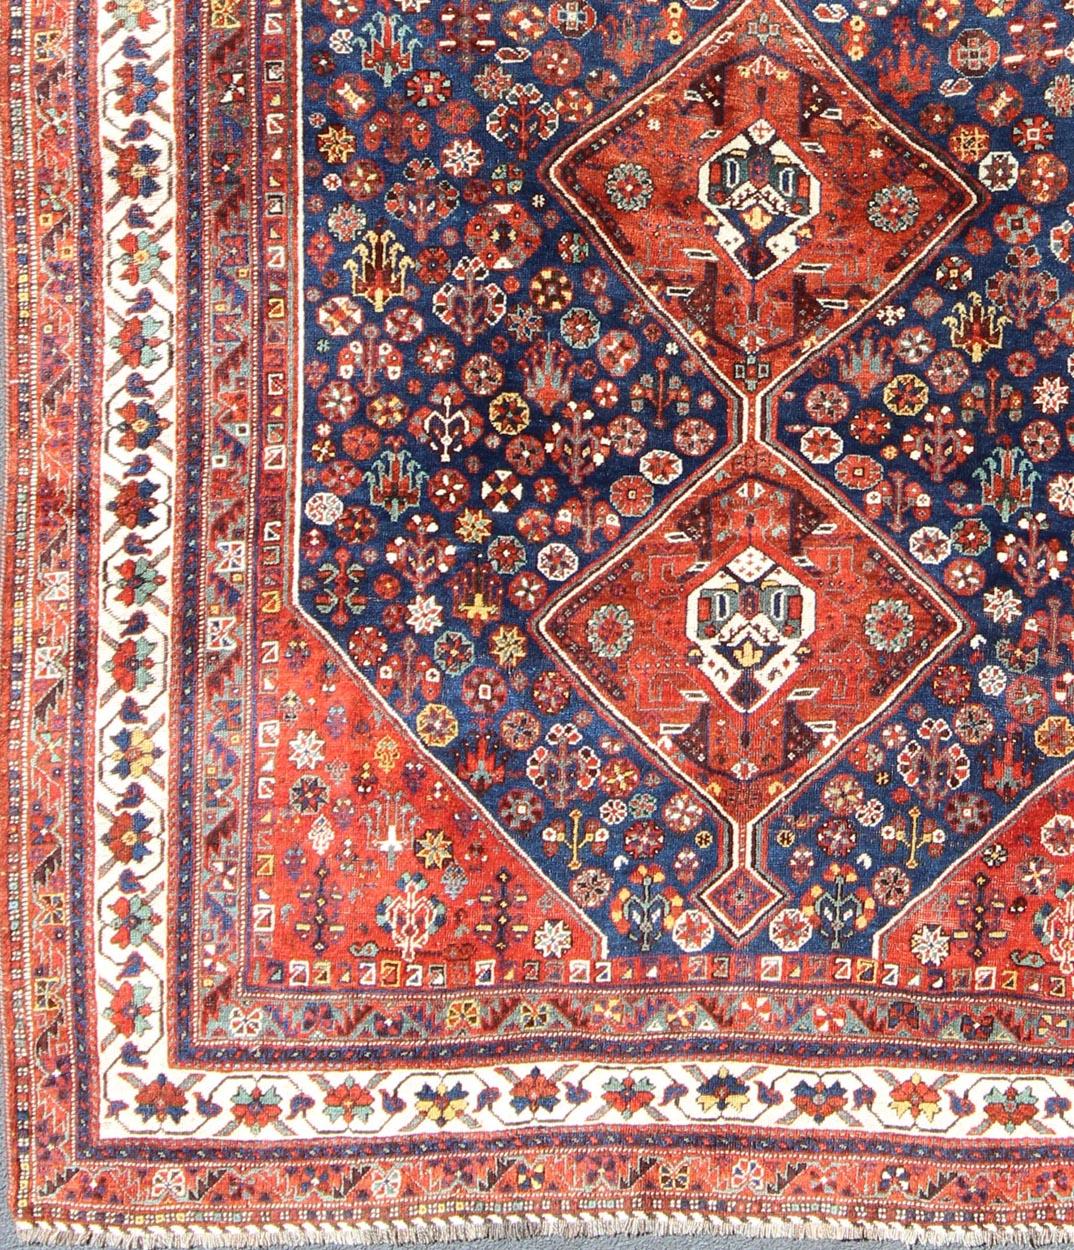 Persian Shiraz antique rug in red and blue with Medallion geometric design, rug ema-7567, country of origin / type: Iran / Shiraz, circa 1930.

This vintage Persian Shiraz rug (circa early 20th century) features a unique blend of colors and an